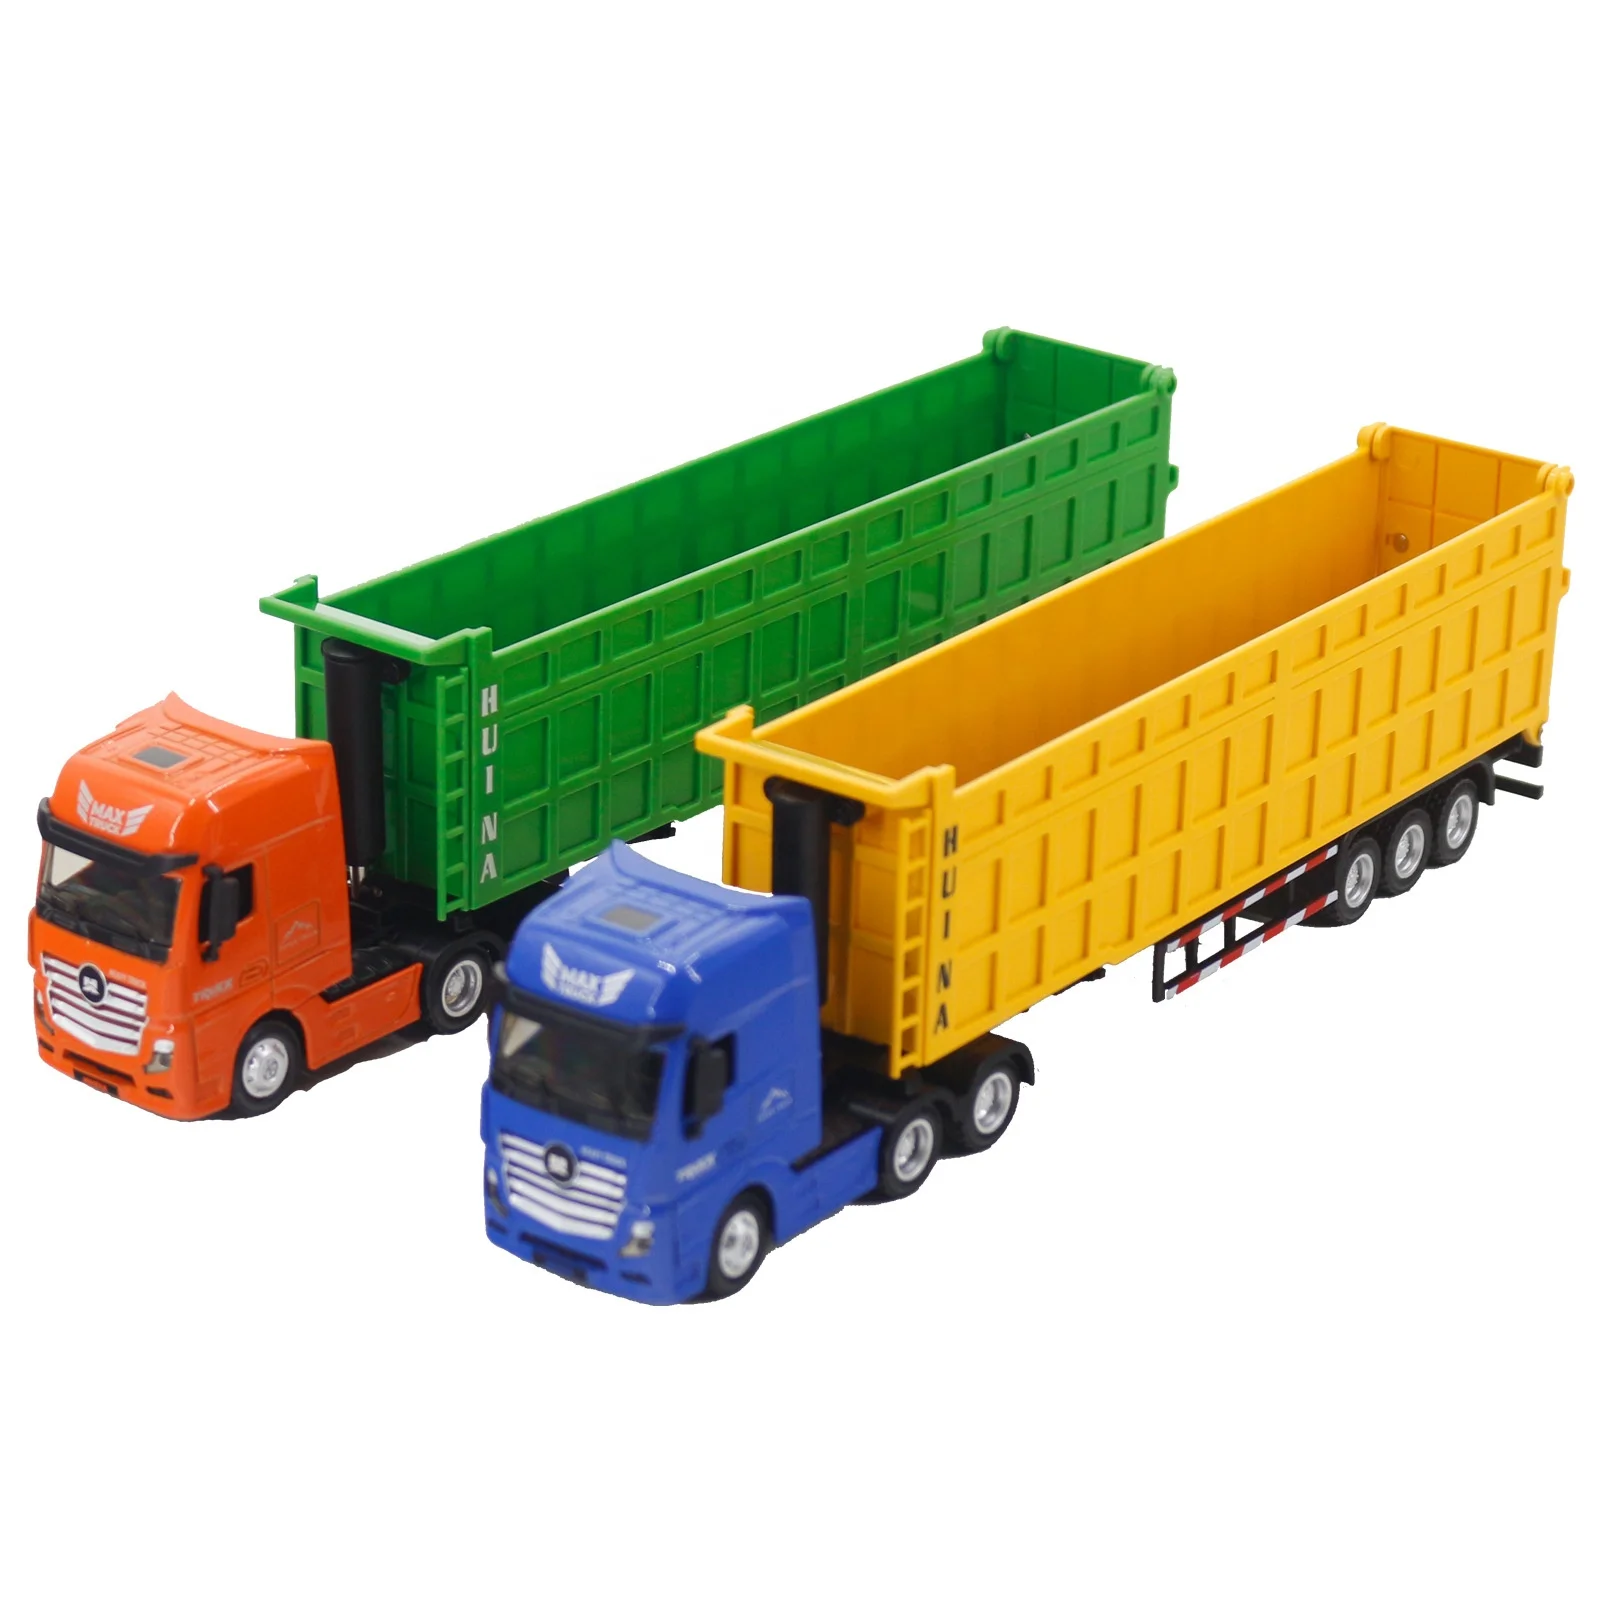 

Diecast Metal Dump Trailer 1/50 Scale Semi Zinc Alloy Metal Static Model Vehicle Truck for Engineering Toy for kids